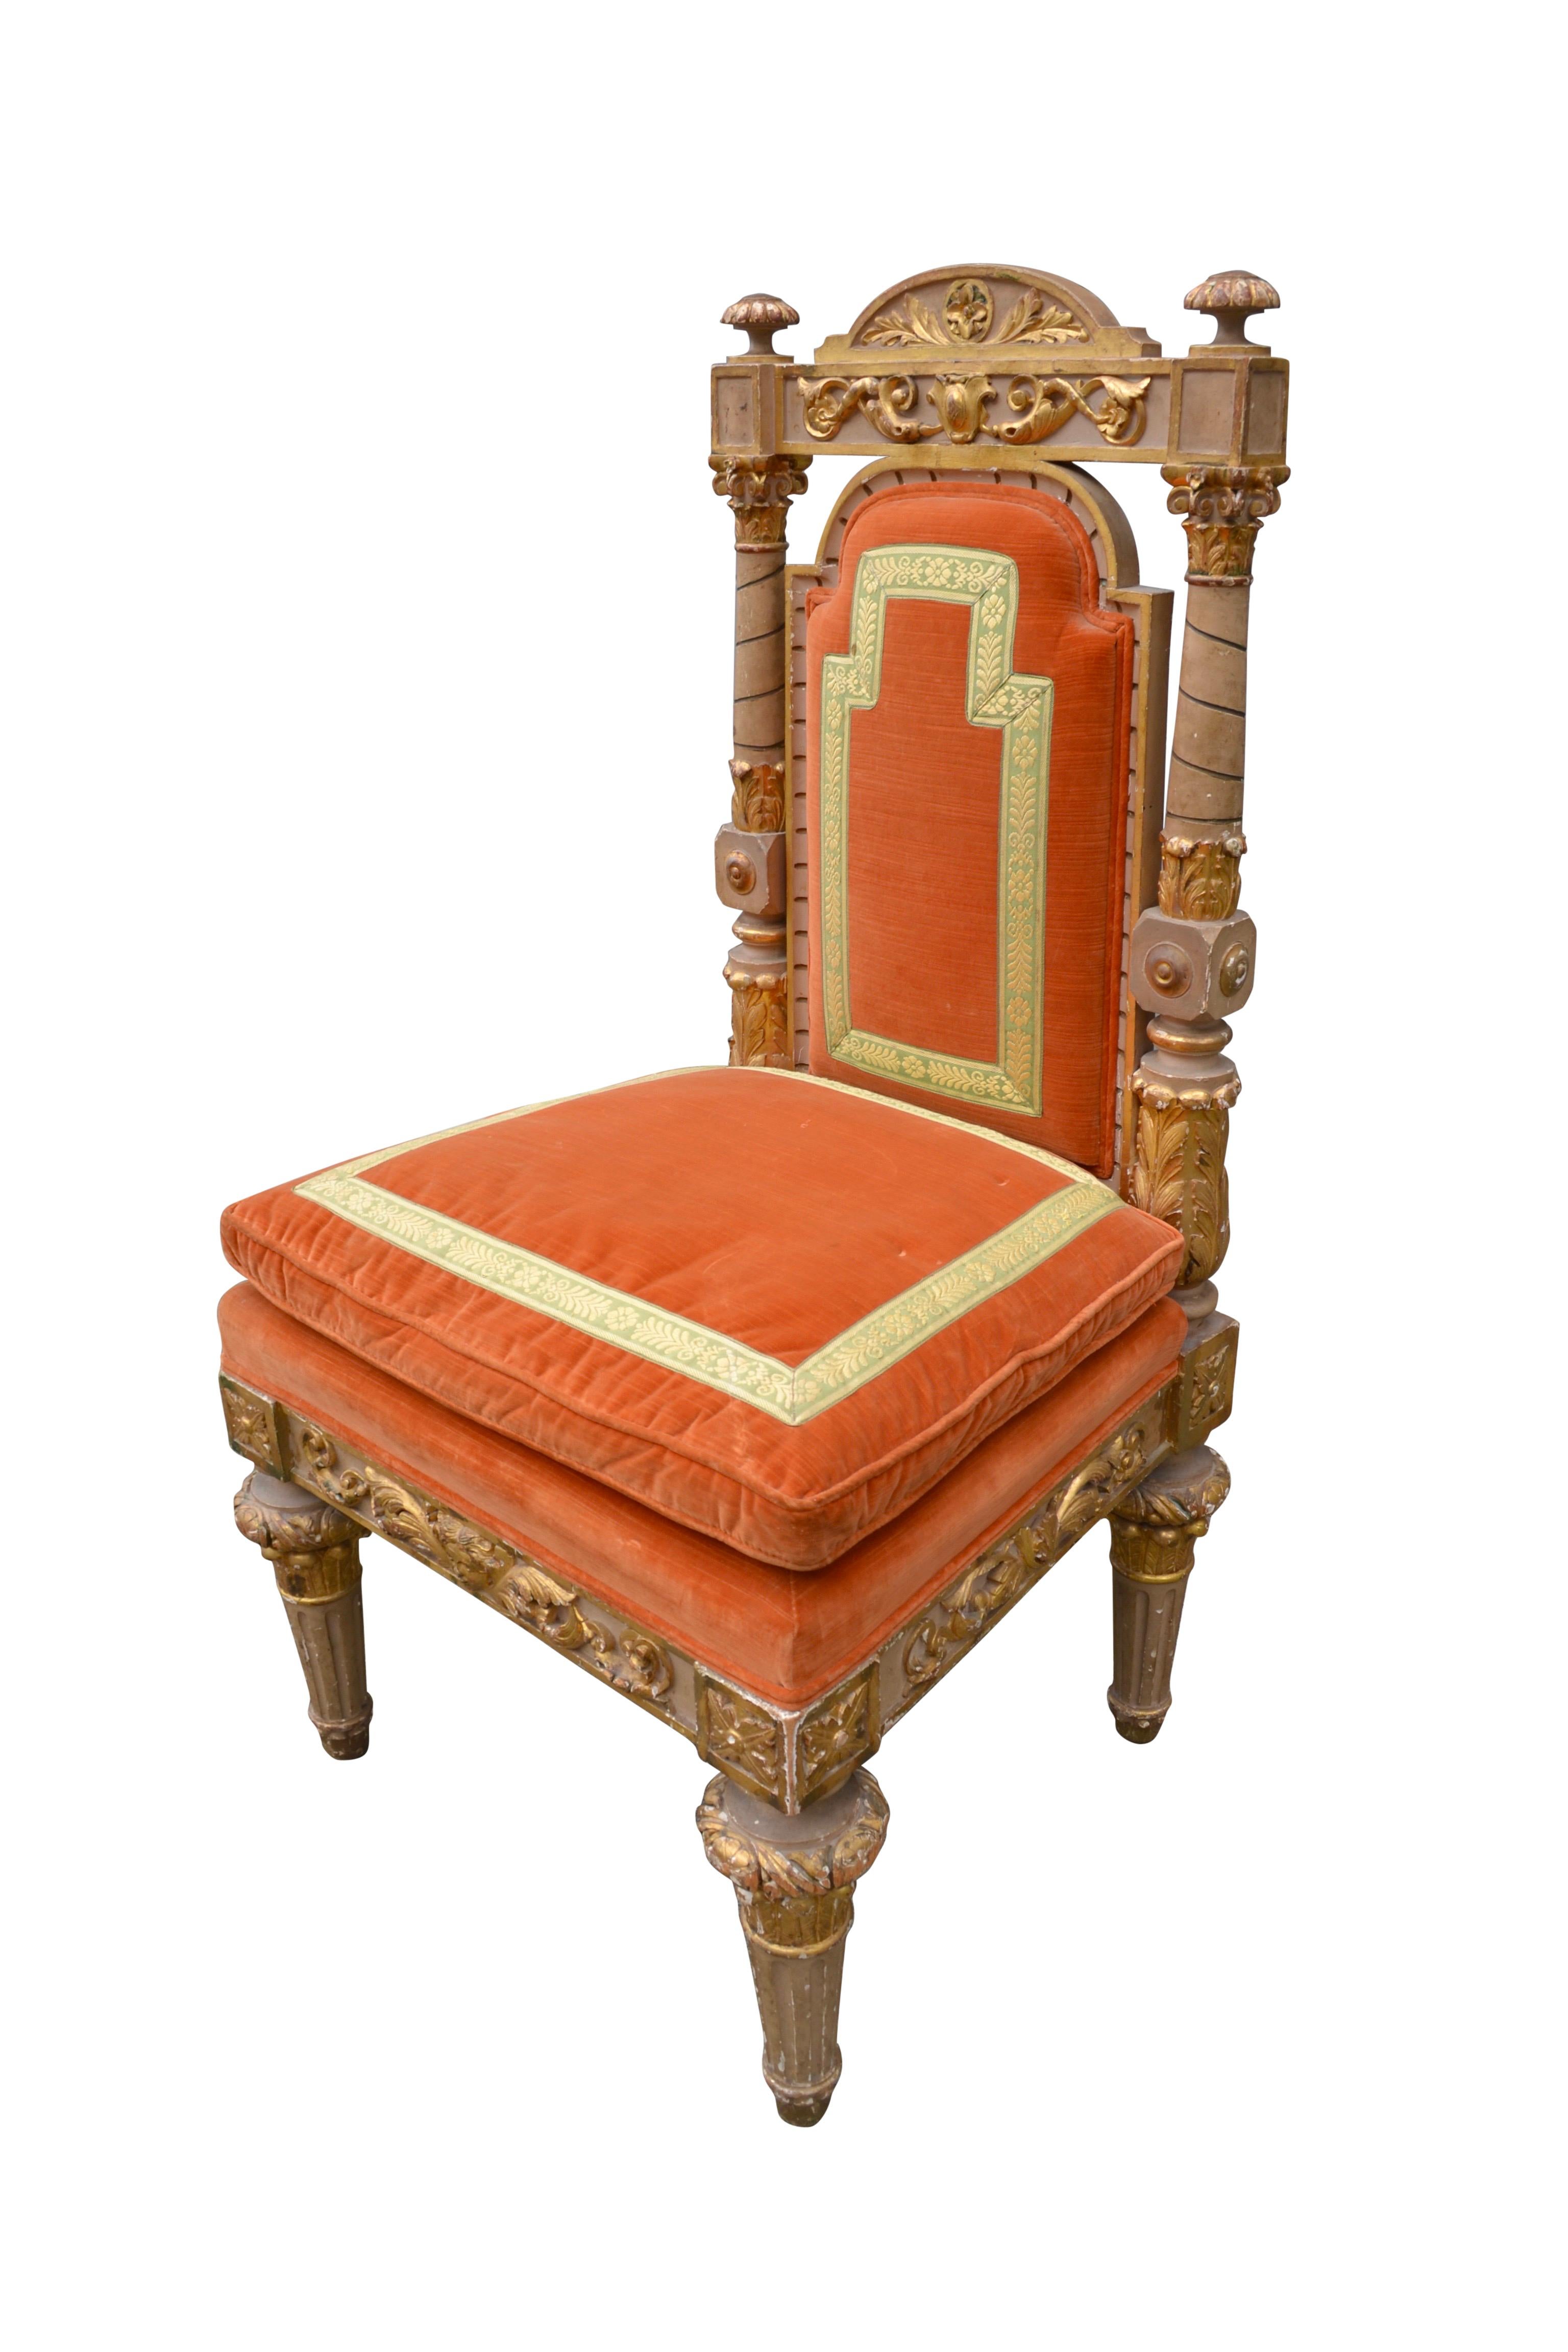 A beautifully carved large scale Piedmontese chair with a cream painted and gilt decorated frame. The shield shaped back has two circular highly carved columns to each side, below a deeply carved top chair rail with a curved pediment. The chair seat